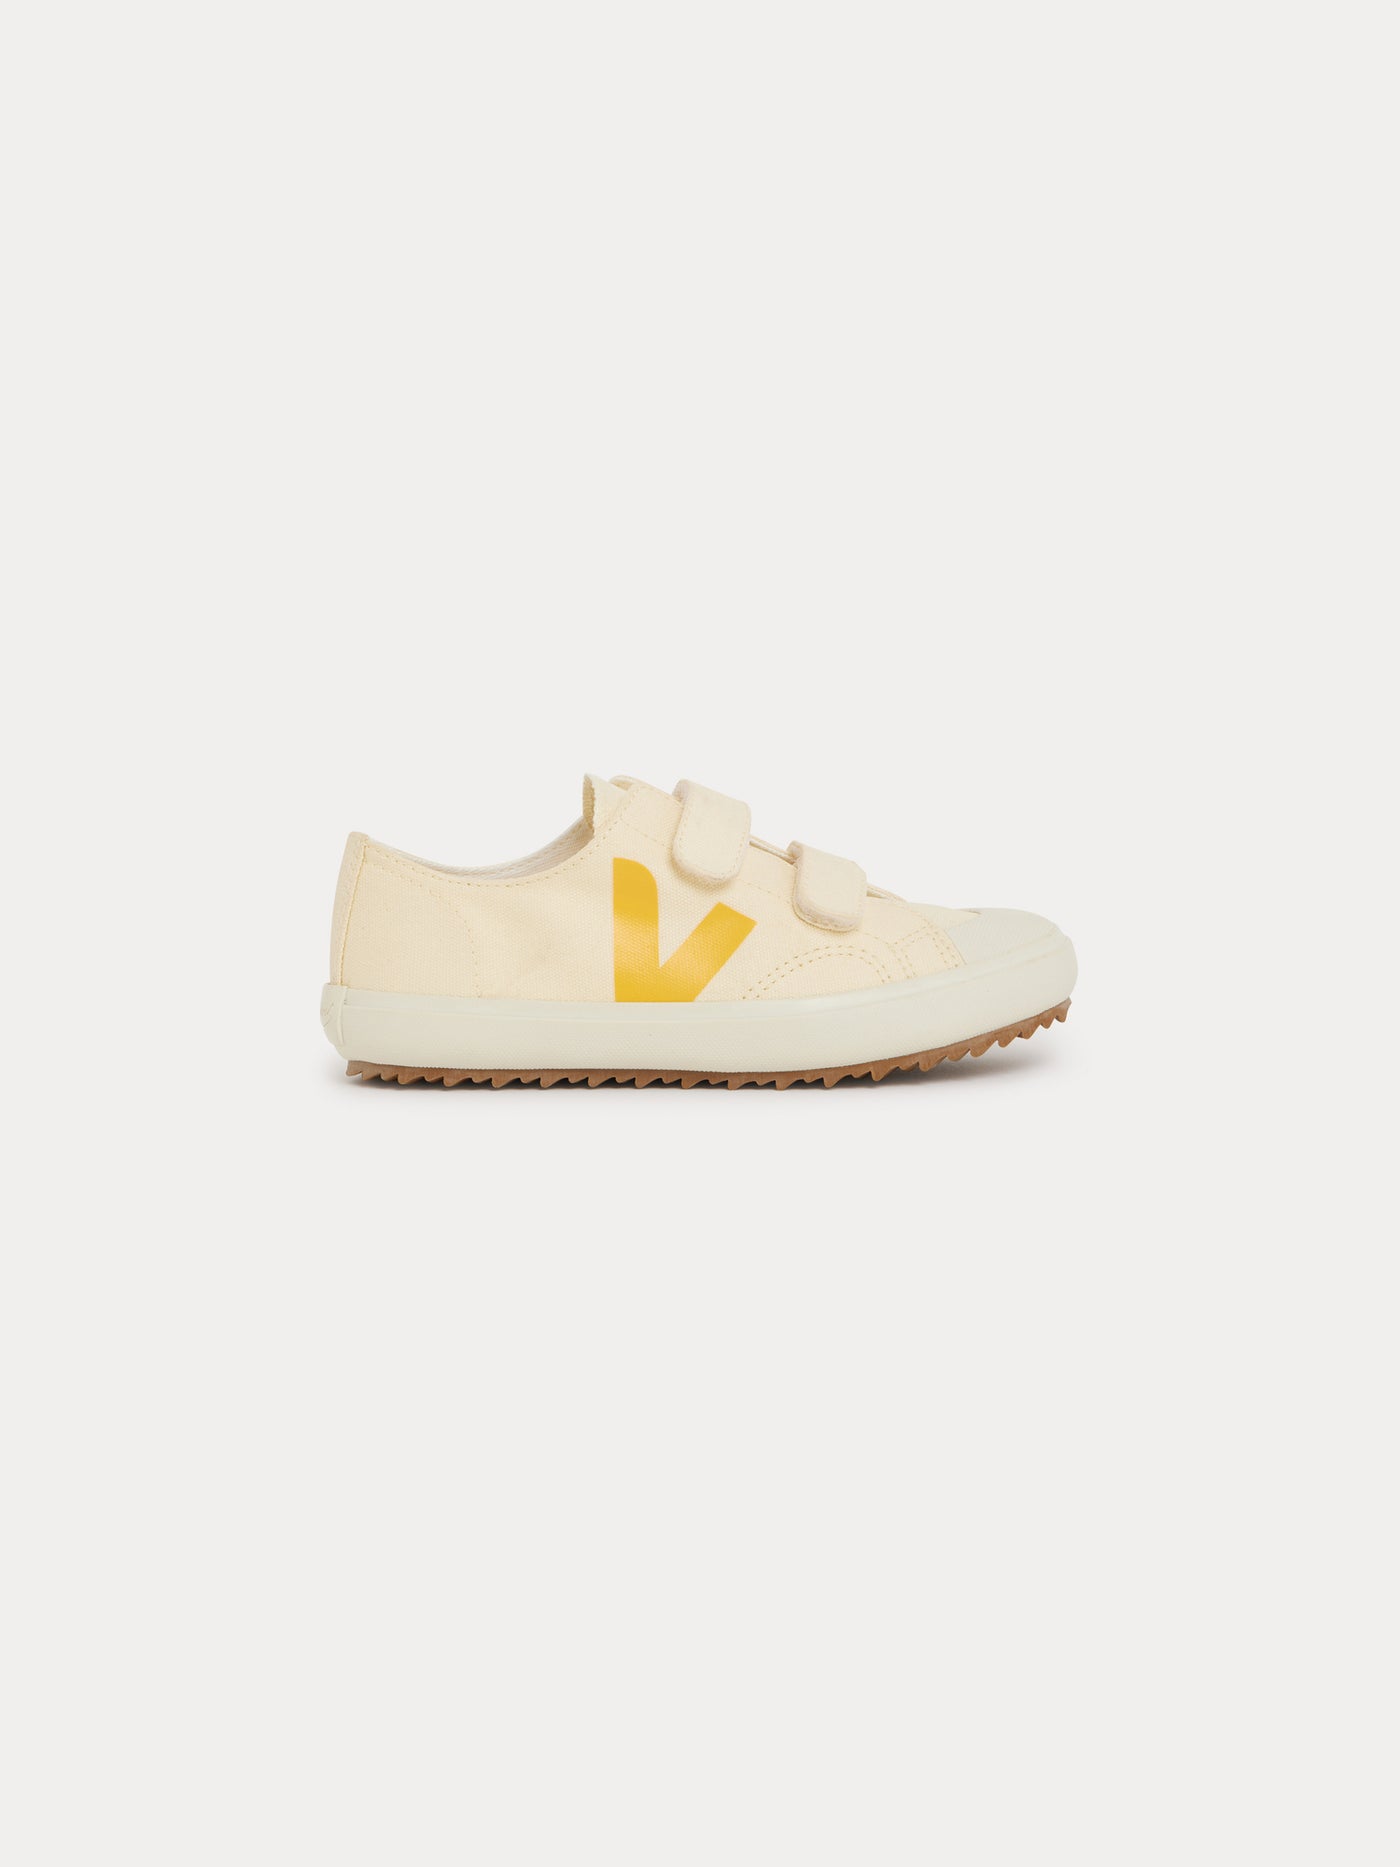 Bonpoint x Veja Ollie Sneakers IVORY